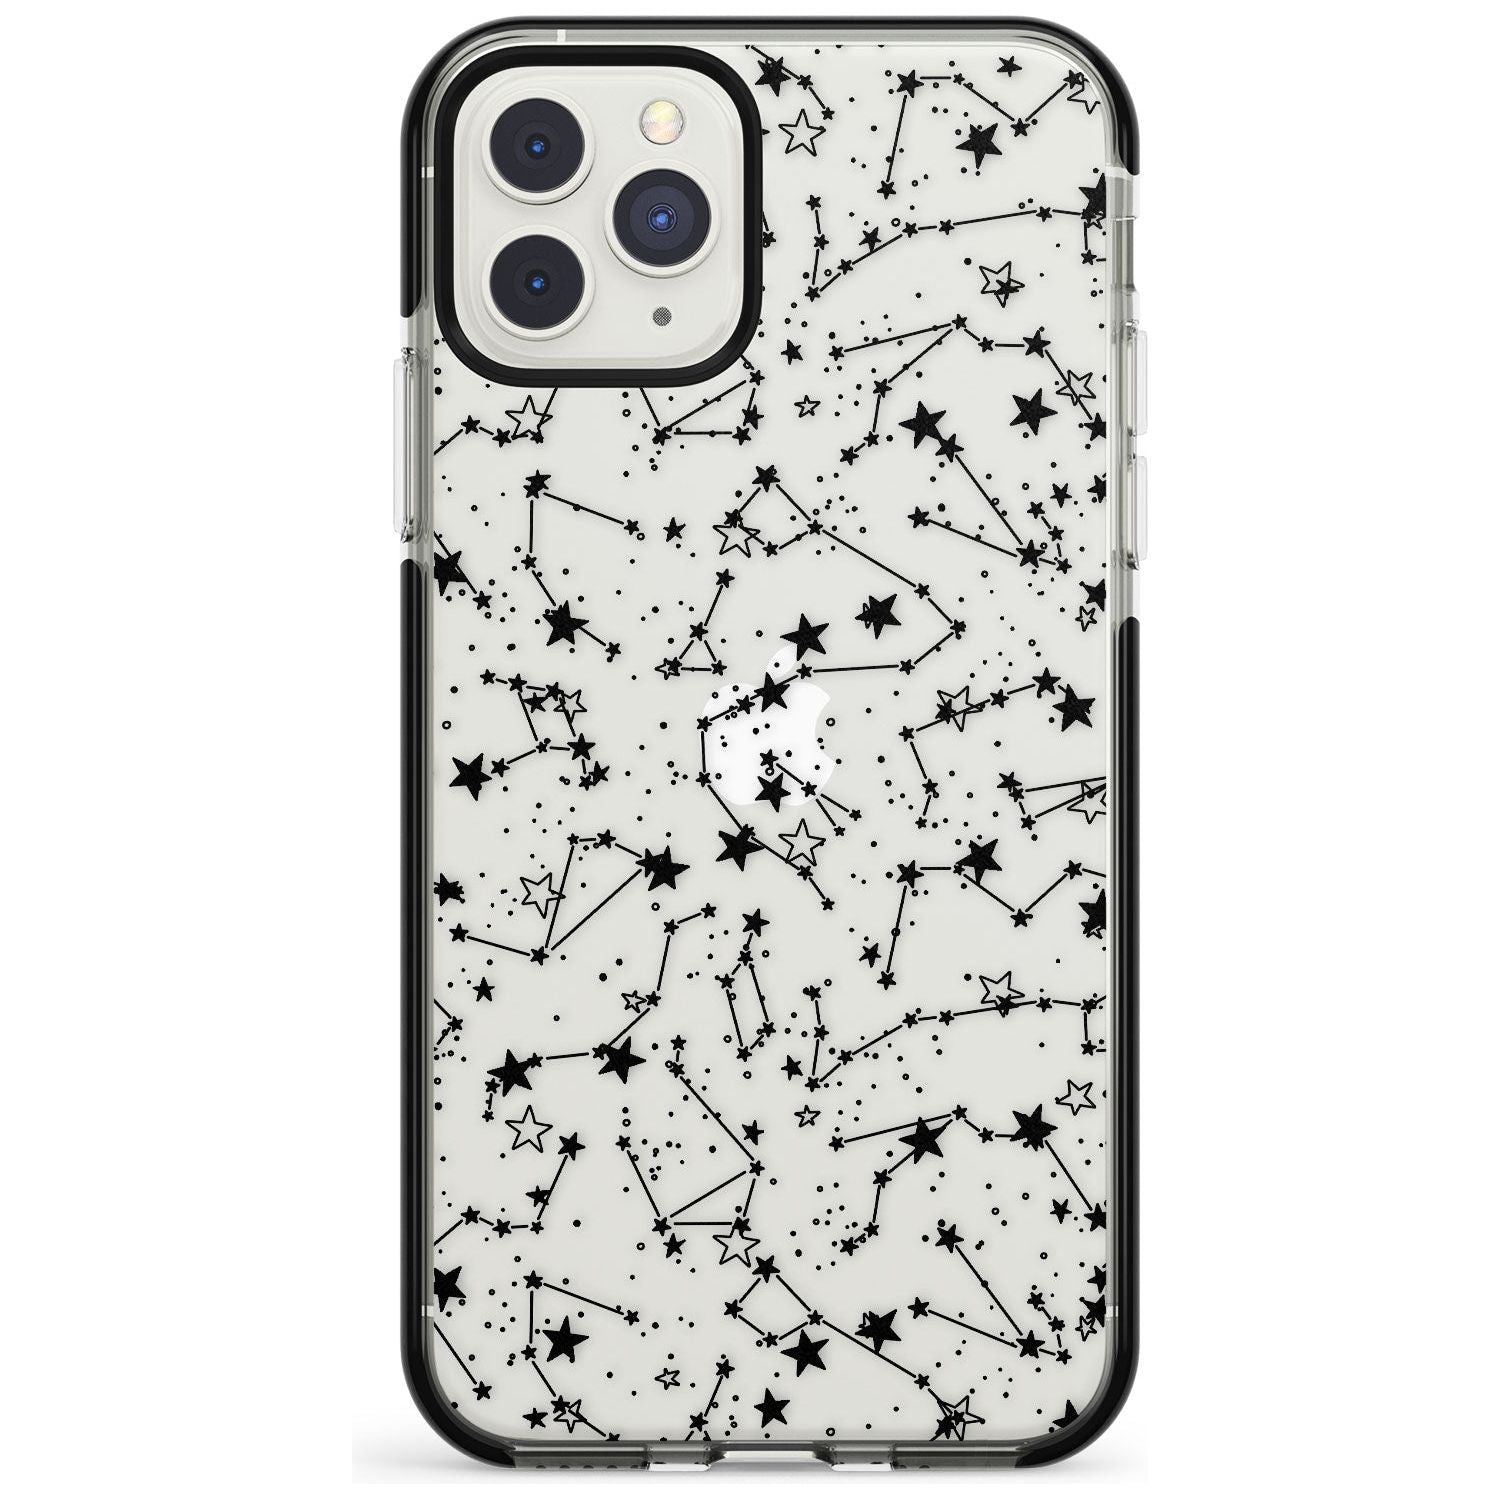 Constellations Black Impact Phone Case for iPhone 11 Pro Max